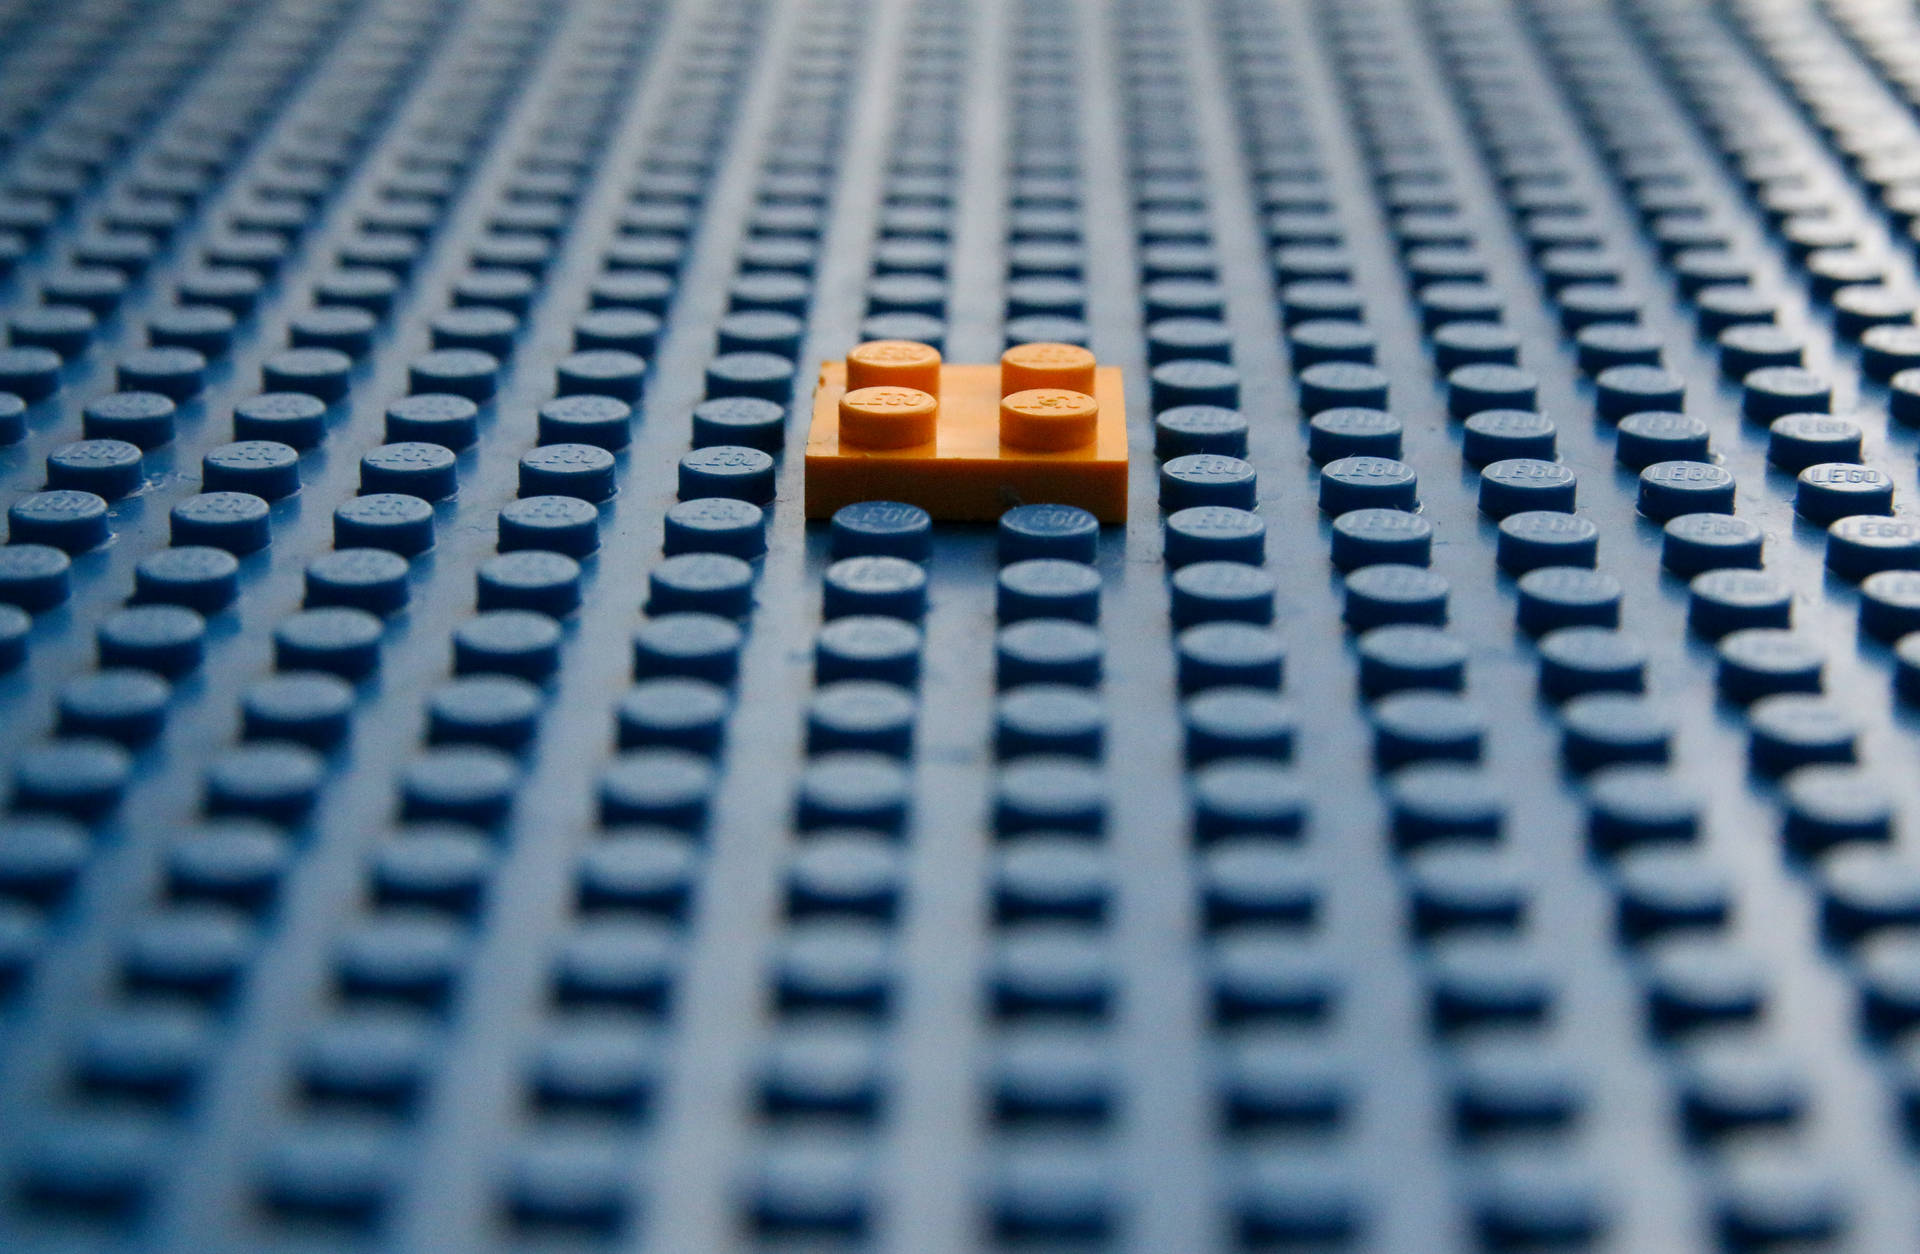 Lego 5472X3575 Wallpaper and Background Image